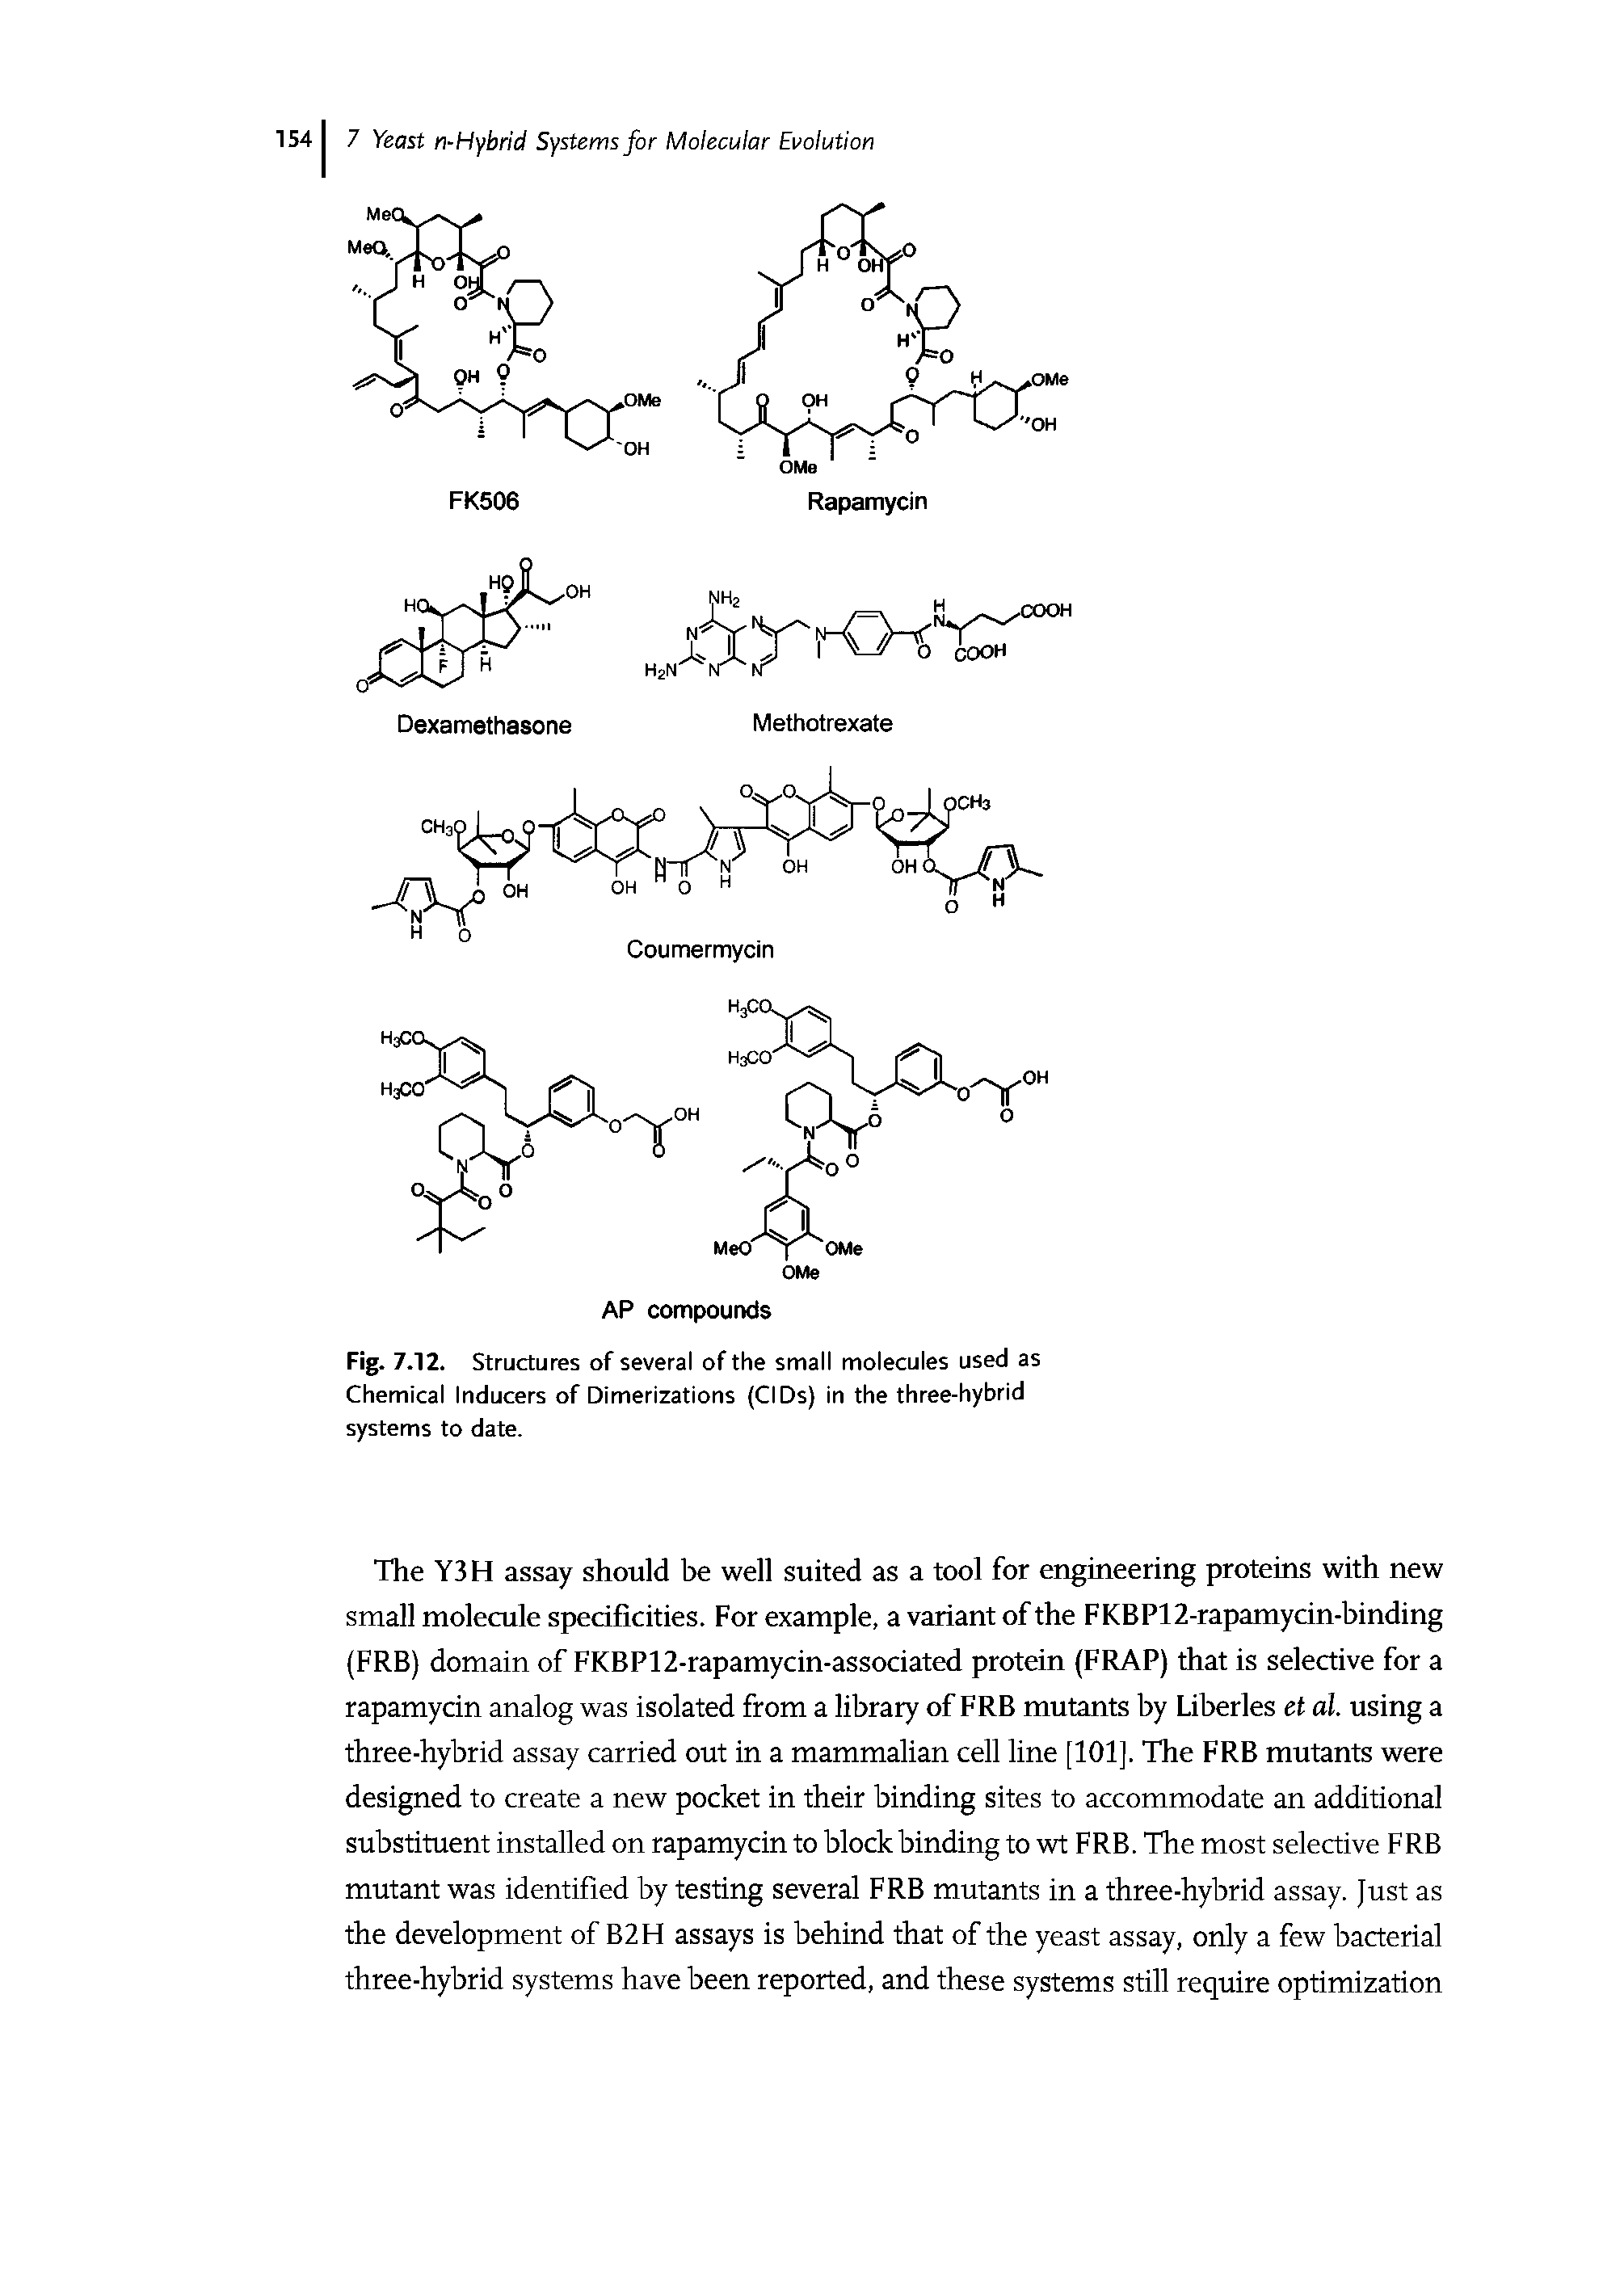 Fig. 7.12. Structures of several of the small molecules used as Chemical Inducers of Dimerizations (CIDs) in the three-hybrid systems to date.